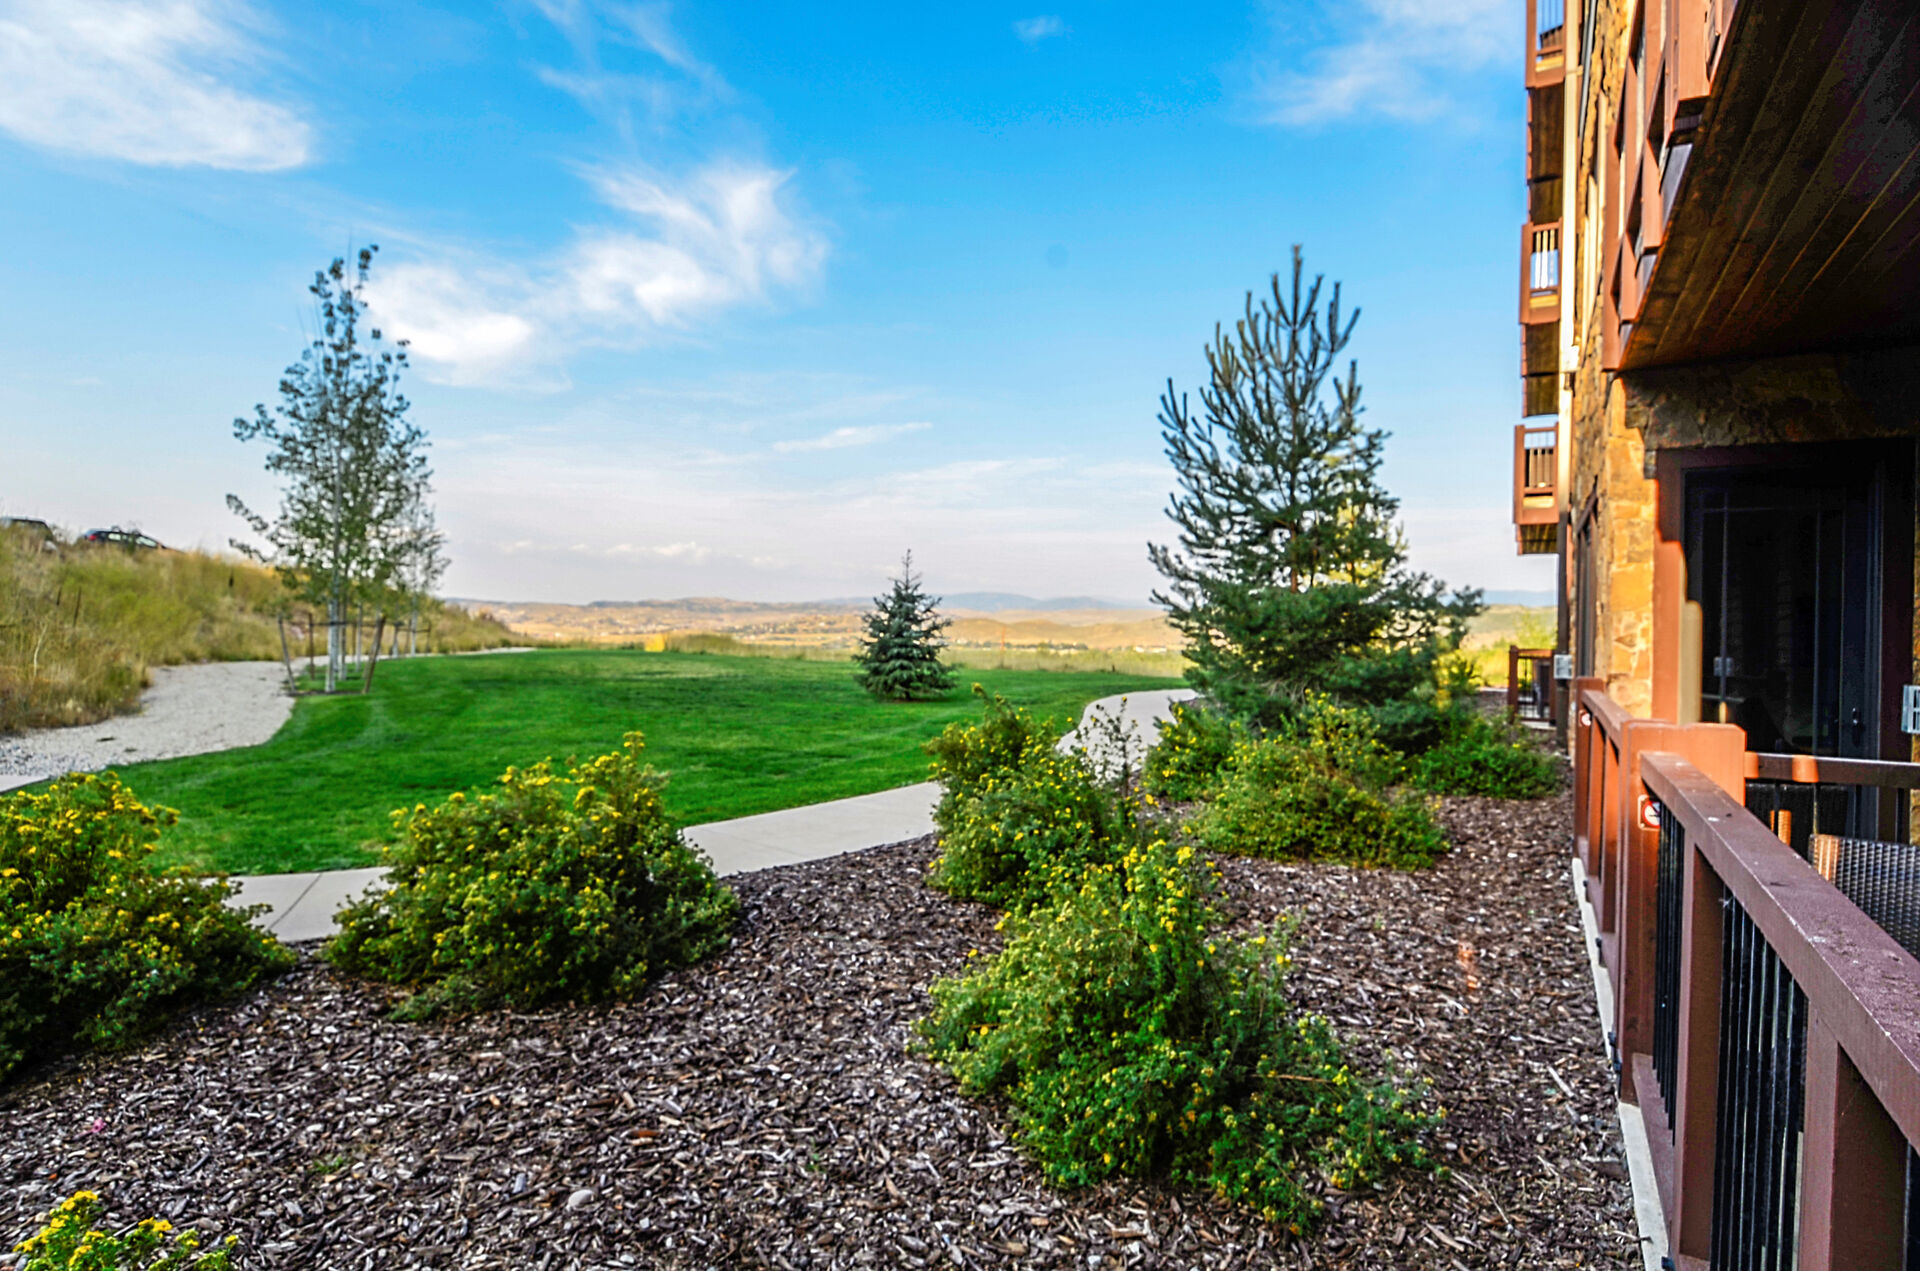 This unit doe not face another building so you get open views out onto the grassy yard area overlooking Utah mountains in the distance.